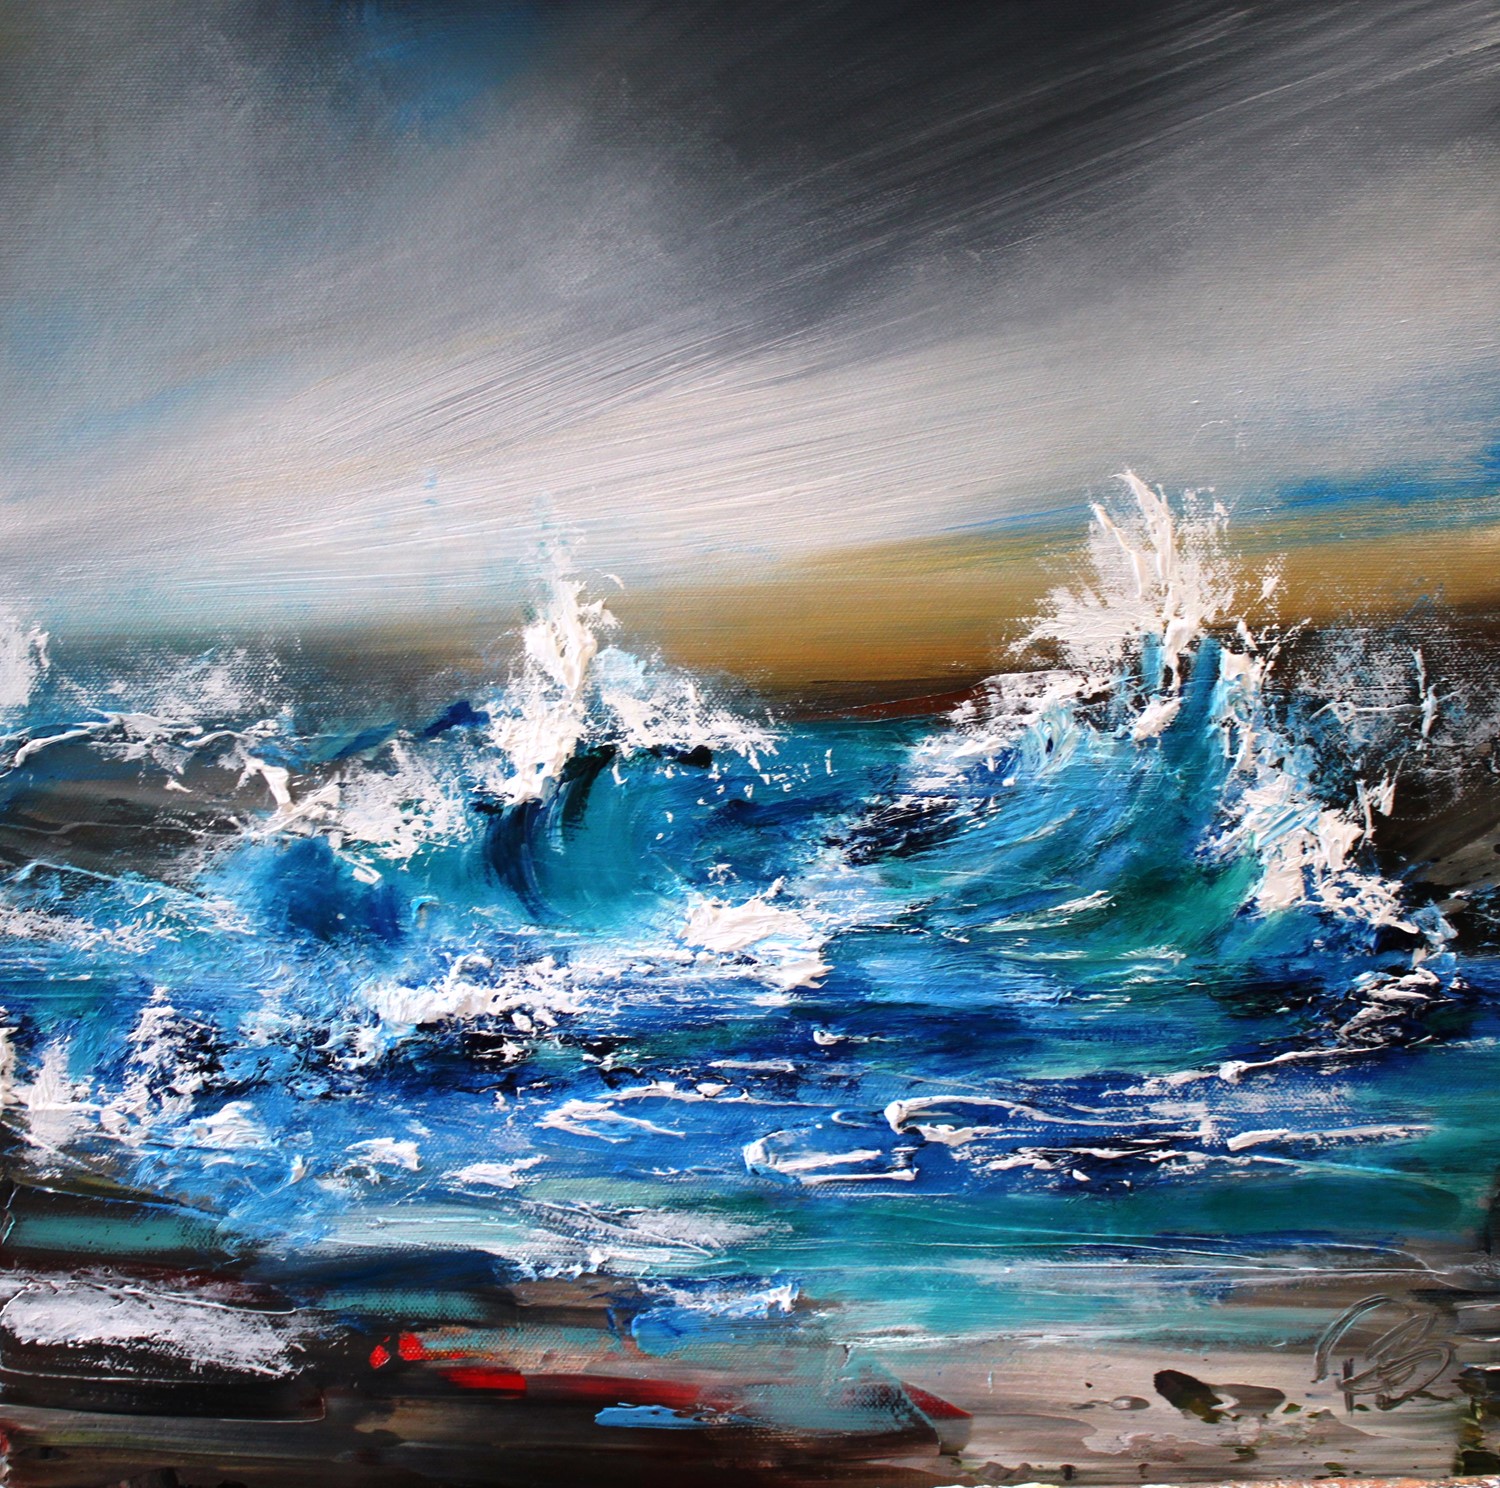 'Stormy Waves' by artist Rosanne Barr